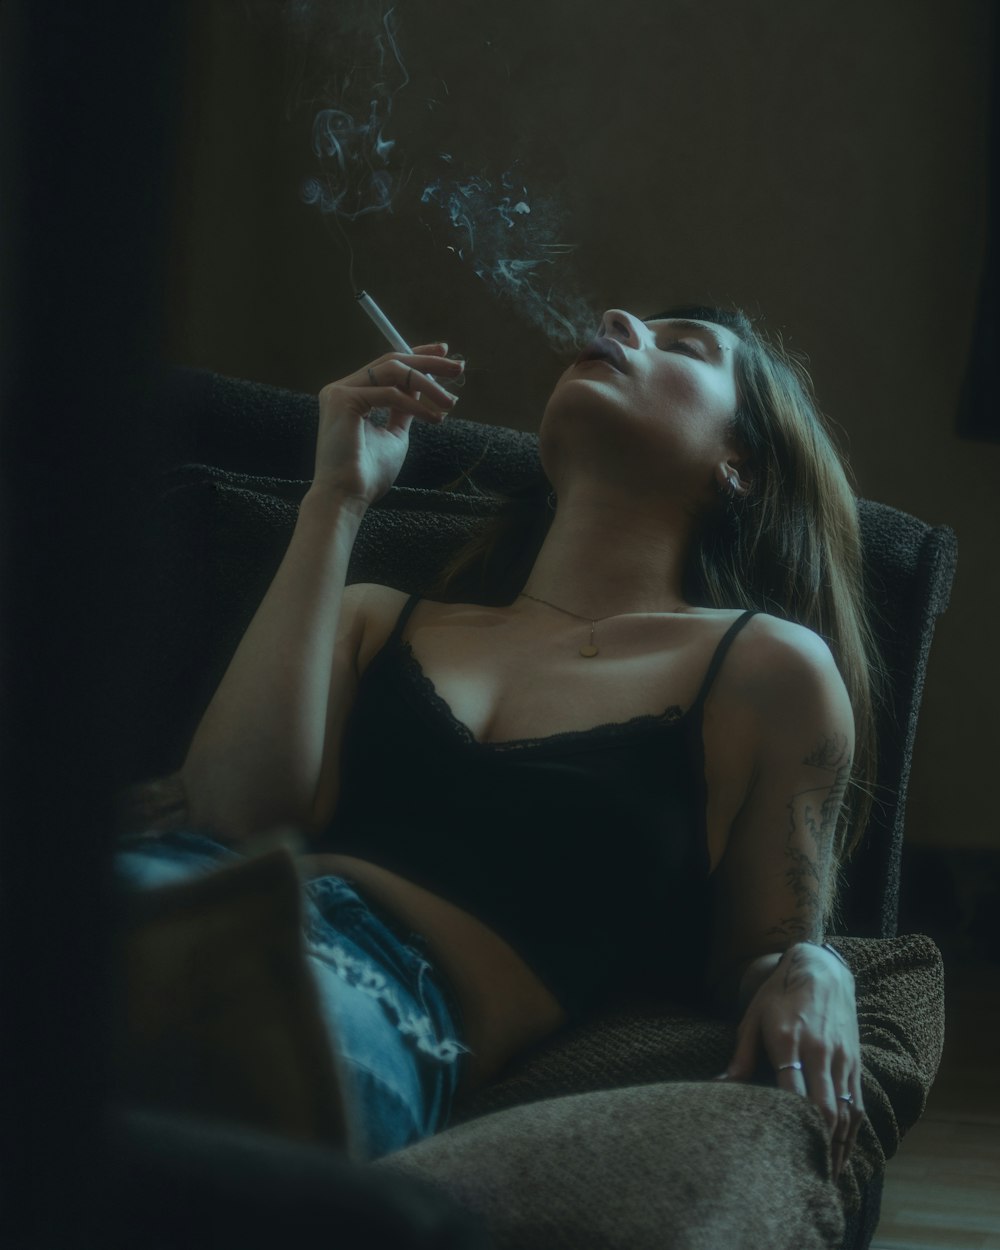 a woman sitting on a couch smoking a cigarette